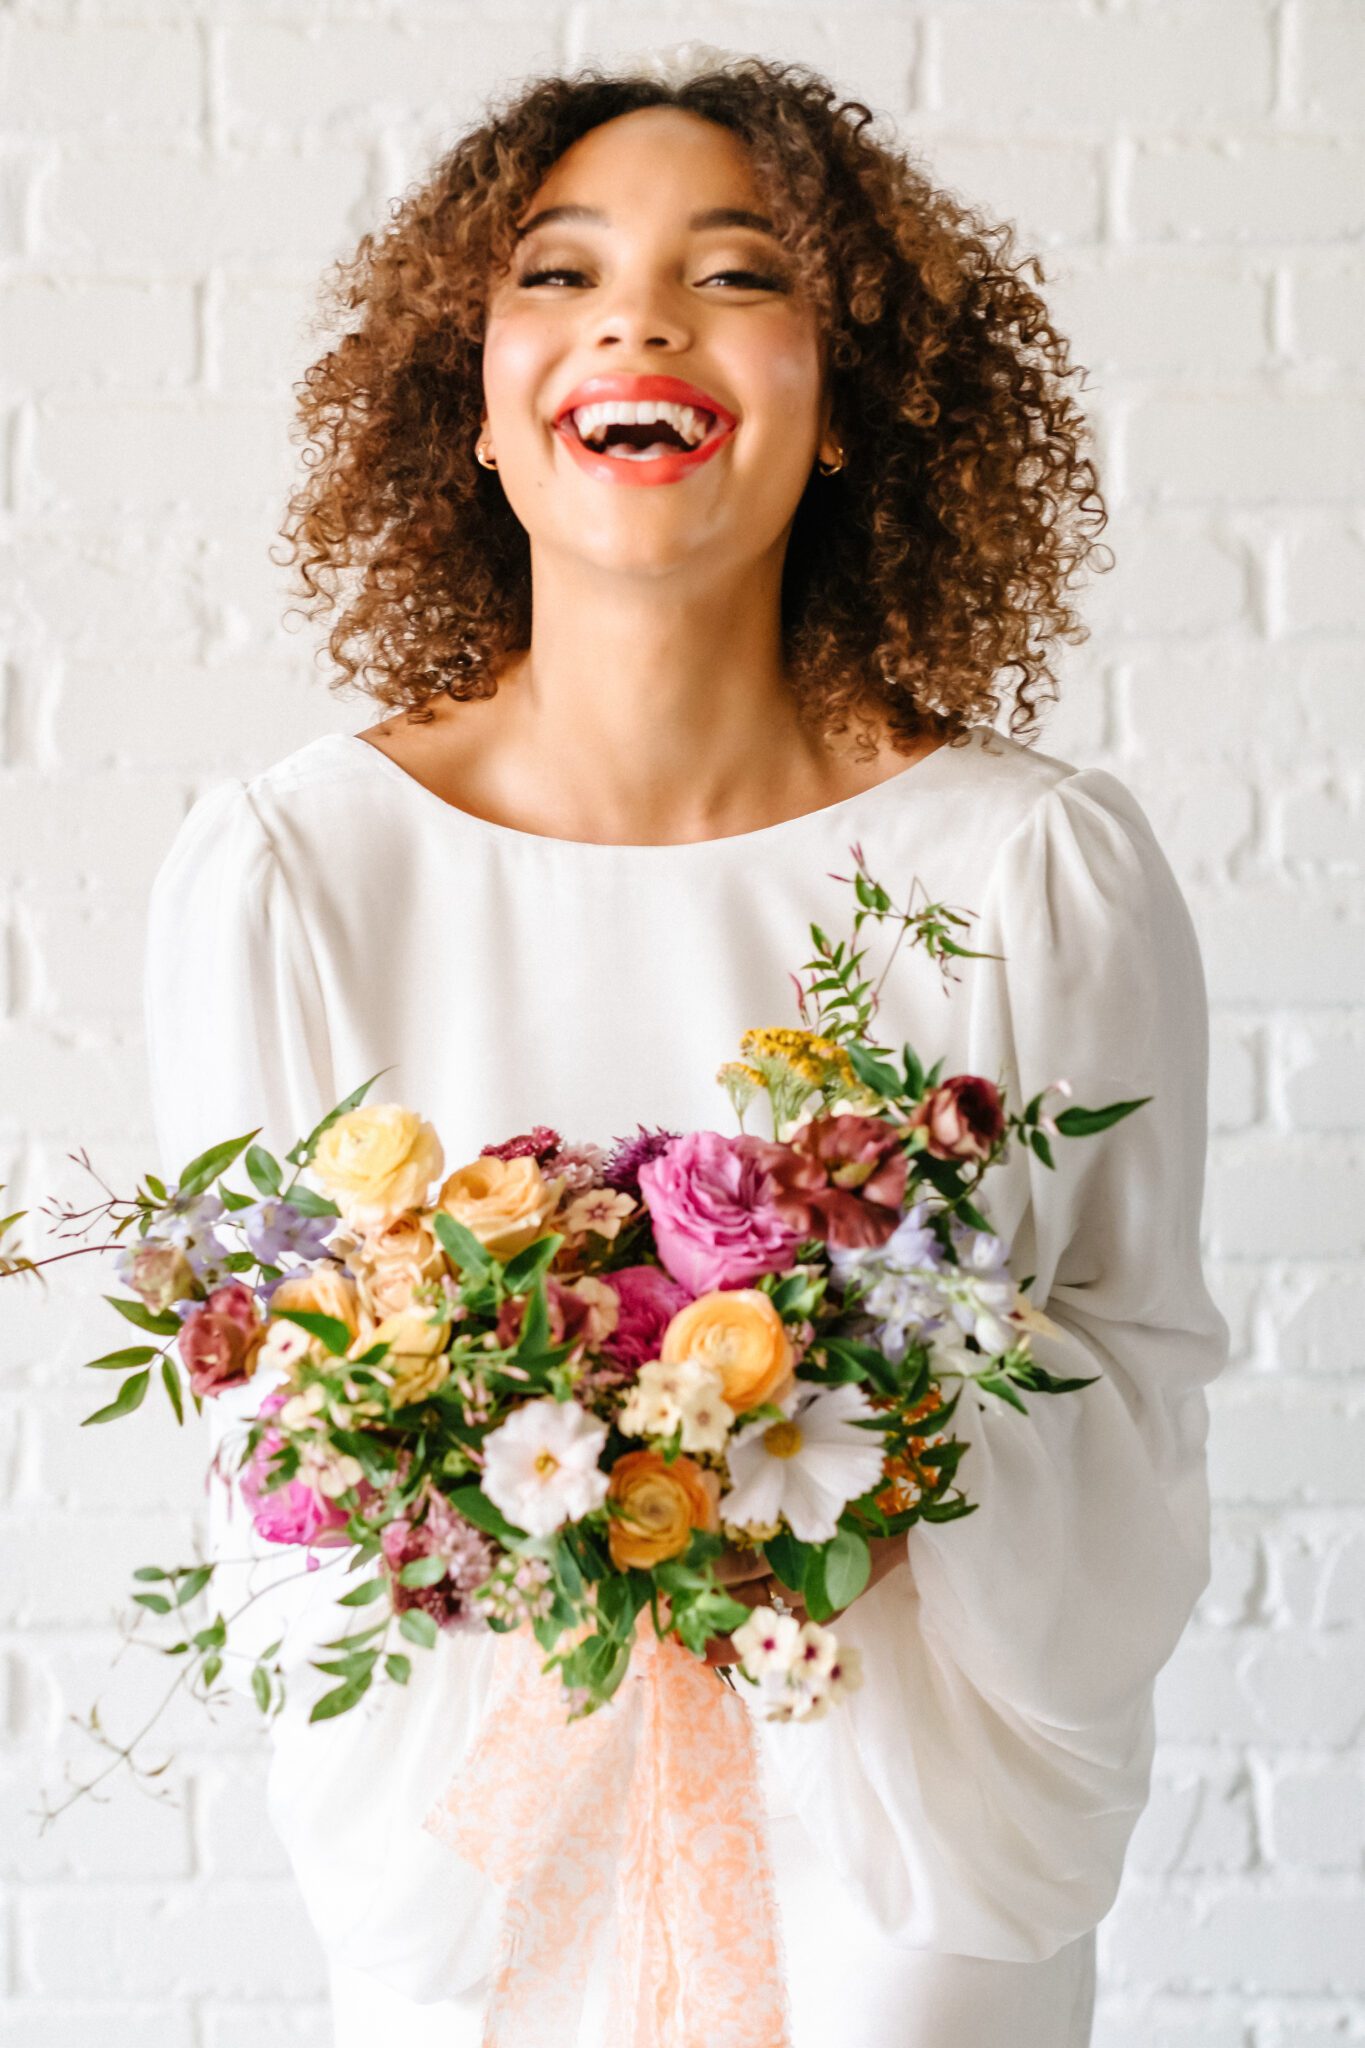 Bright & Colourful Brunch Wedding Inspiration at The Brownstone Calgary, Bronte Bride. Retro inspired vibrant colour palette of purple, orange, yellow, peach, tangerine and coral. Bride wearing short bridal gown with long draped sleeves, holding colourful floral bouquet by Meadow & Vine